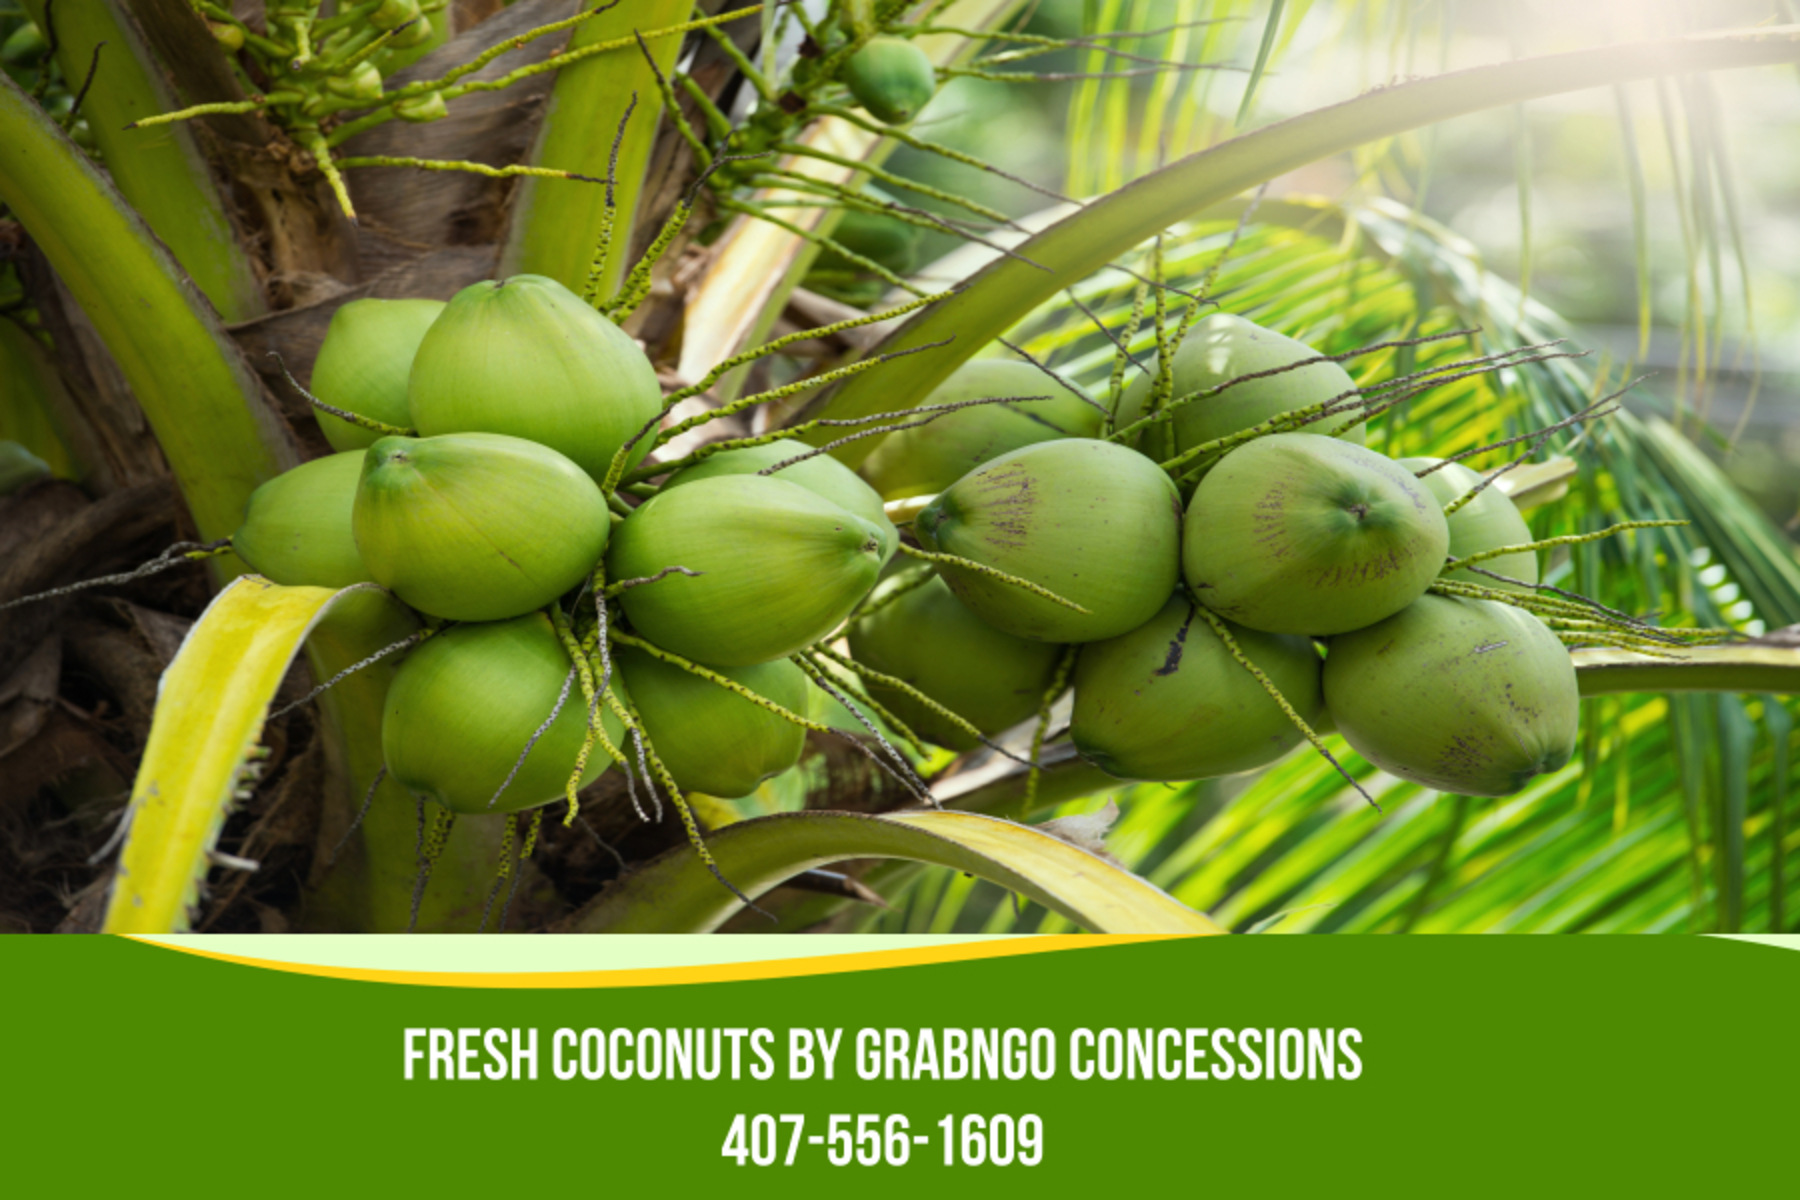 Fresh coconut water made daily or while you wait